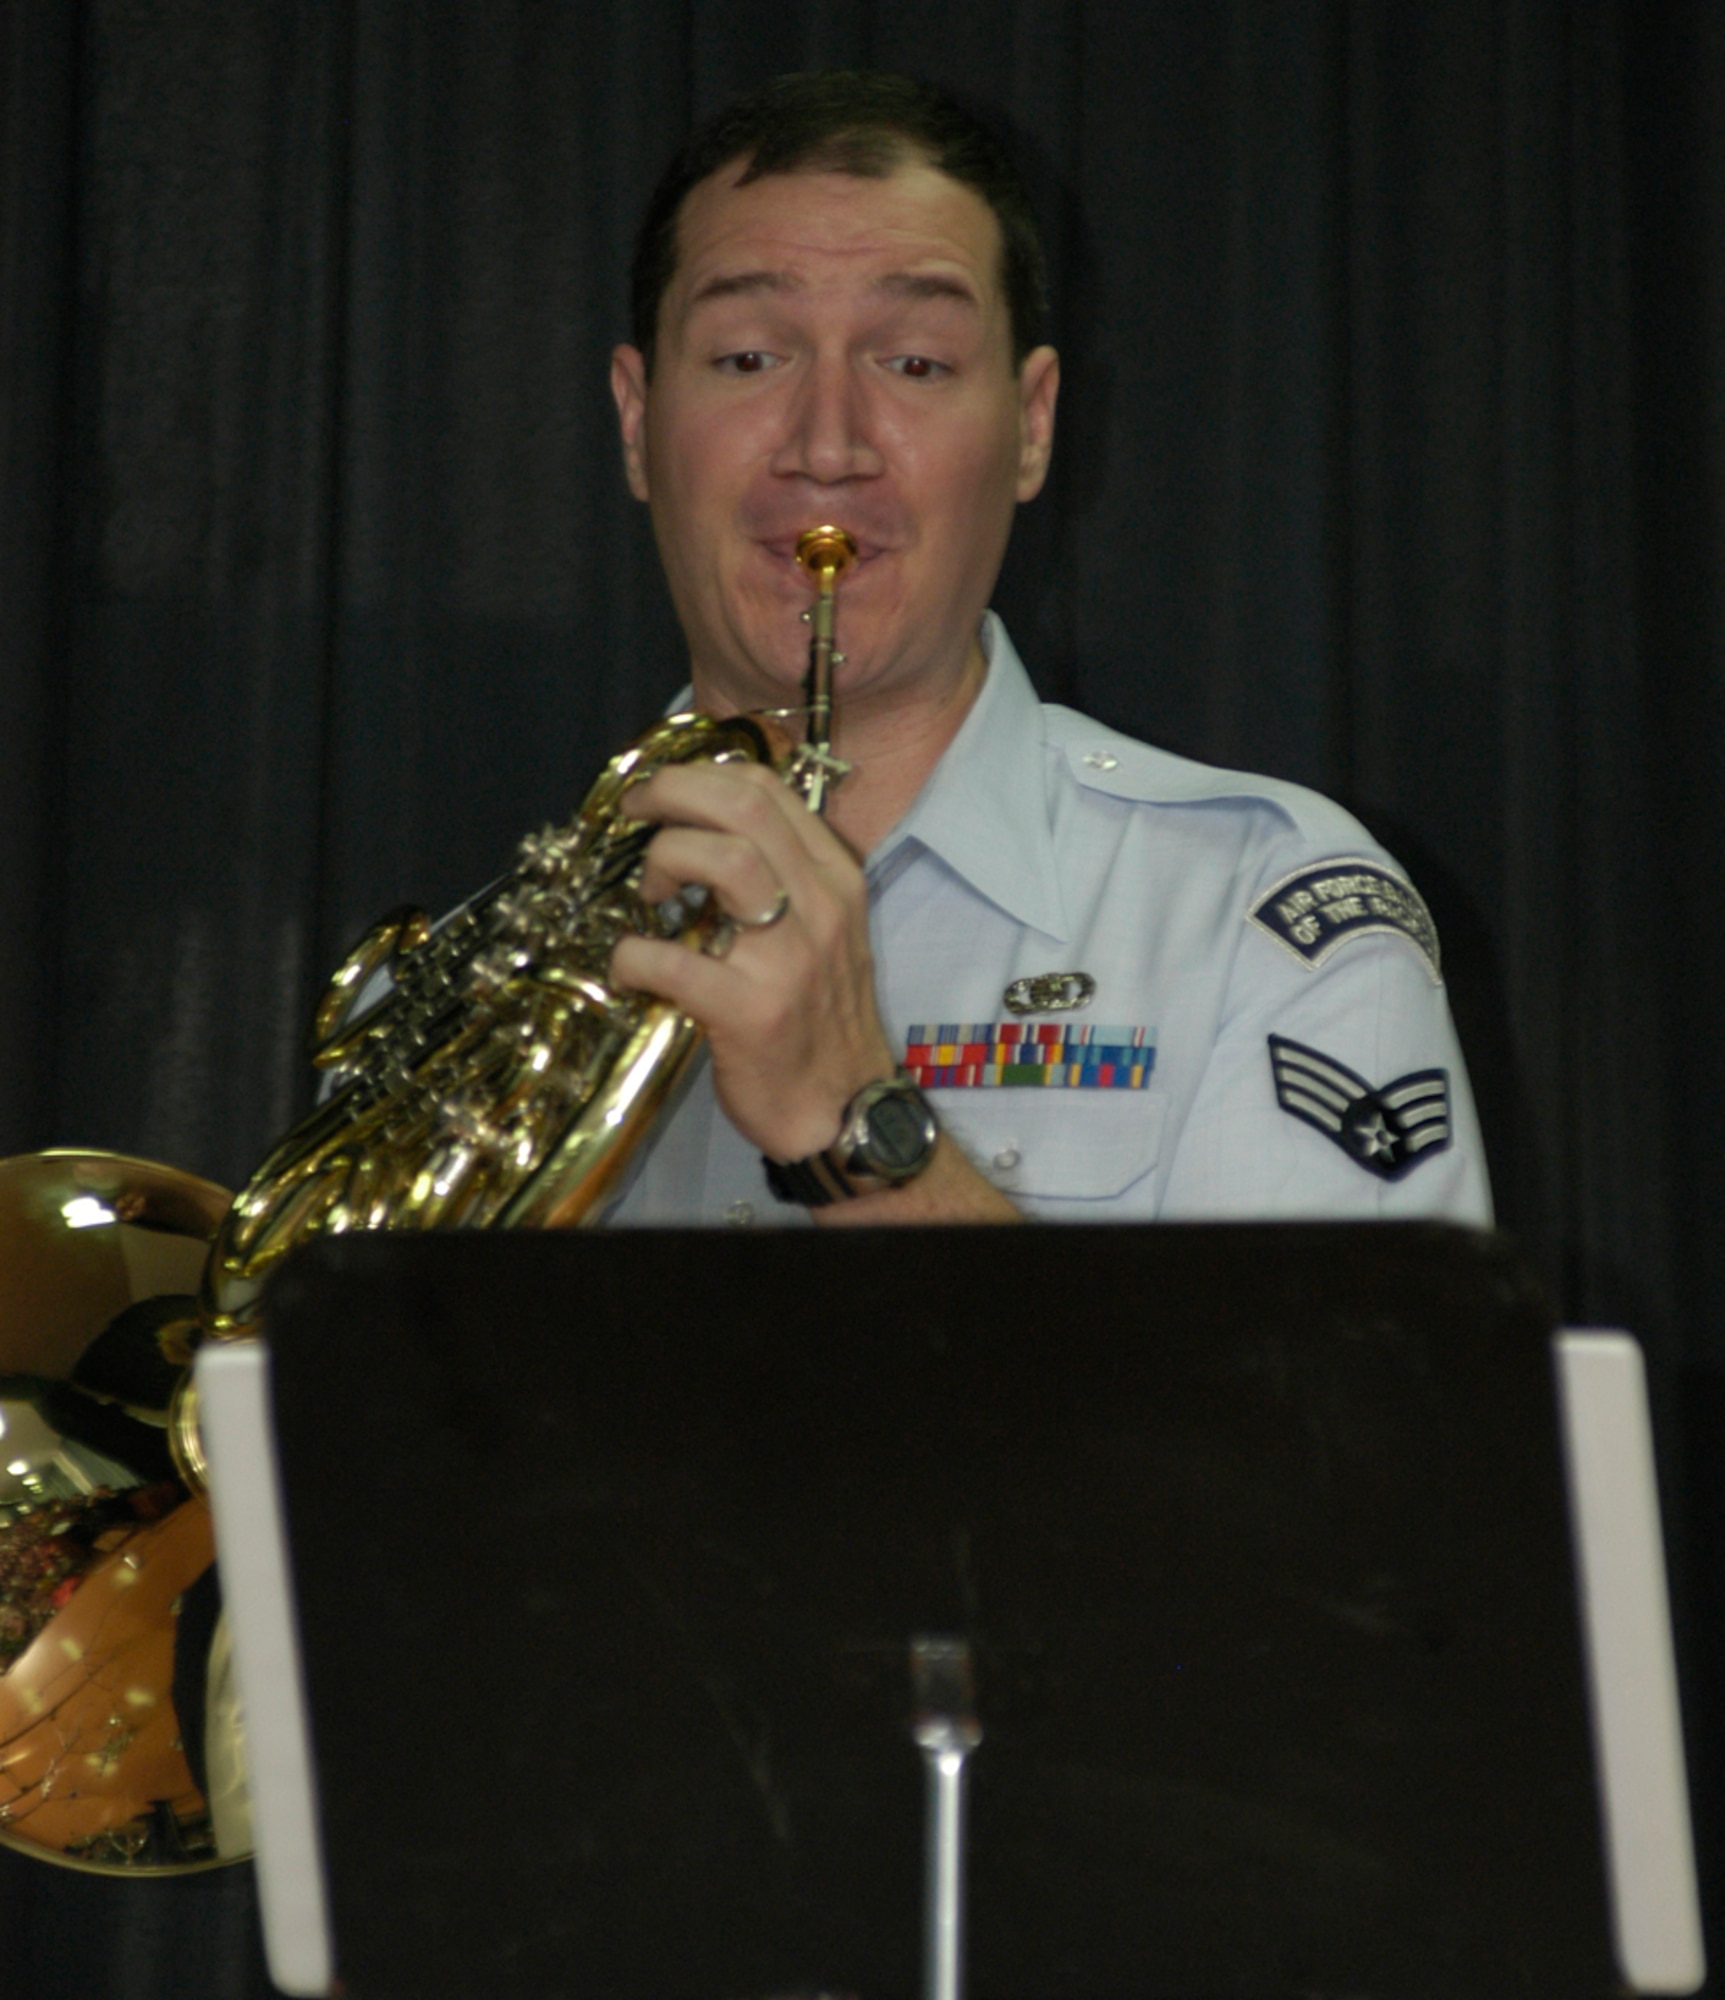 KUNSAN AIR BASE, South Korea -- Air Force Band of the Pacific french horn player Senior Airman Craig Matta performs for students at Na Po Elementary School during the groups performance at the local Gunsan City School Dec. 5. The Elmendorf Air Force Base, Alaska based band performed for more than 300 students, parents and teachers as part of their civic outreach and the base's Good Neighbor Program. (U.S. Air Force Photo/Master Sgt. Sean P. Houlihan)